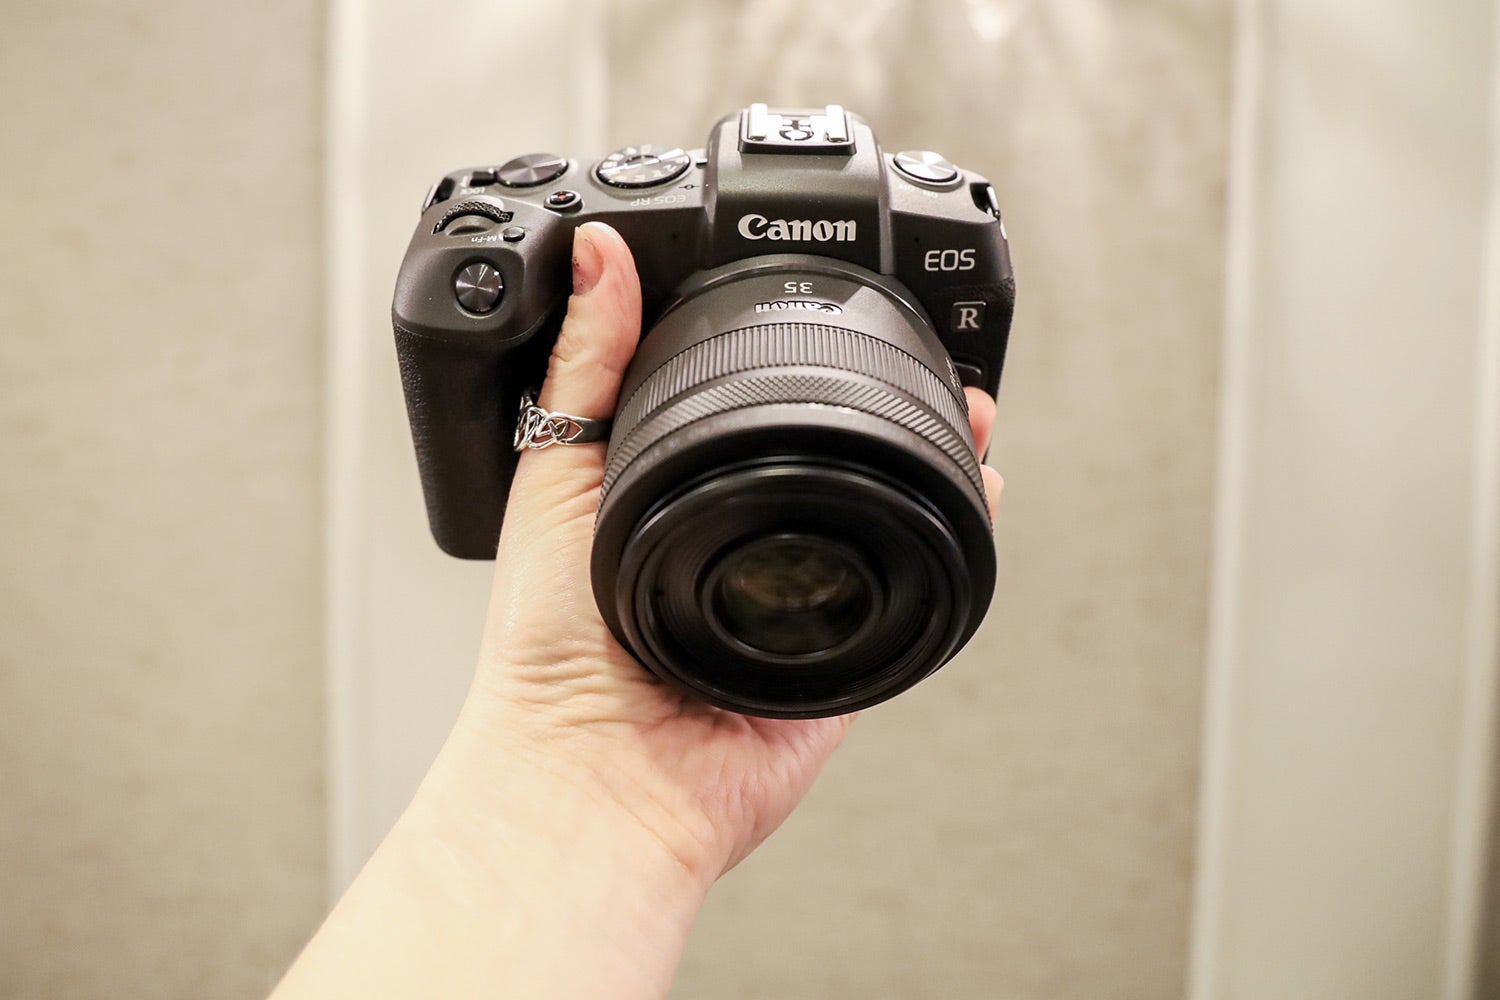 First shots with Canon's EOS RP affordable full-frame mirrorless